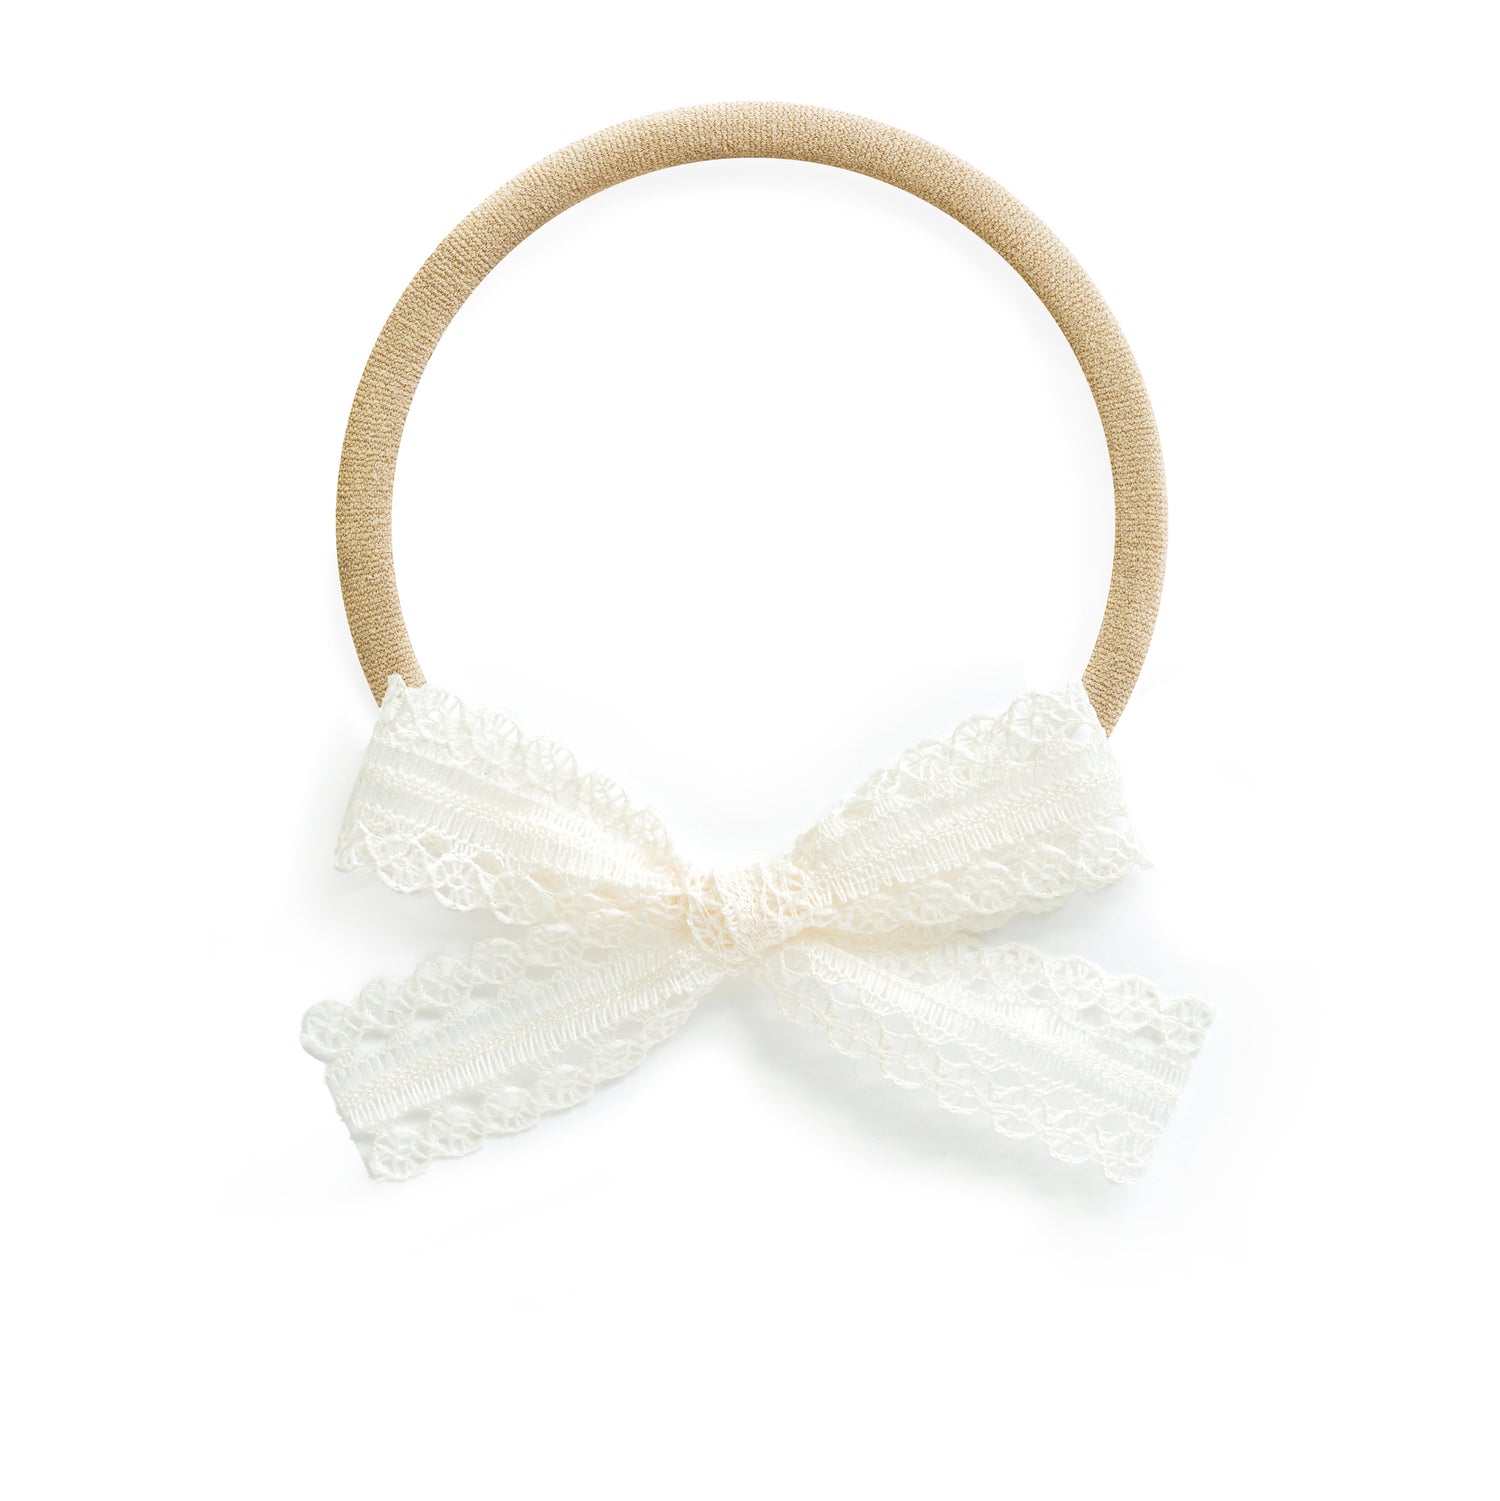 stretchy one size fits all baby bow headband white lace gift